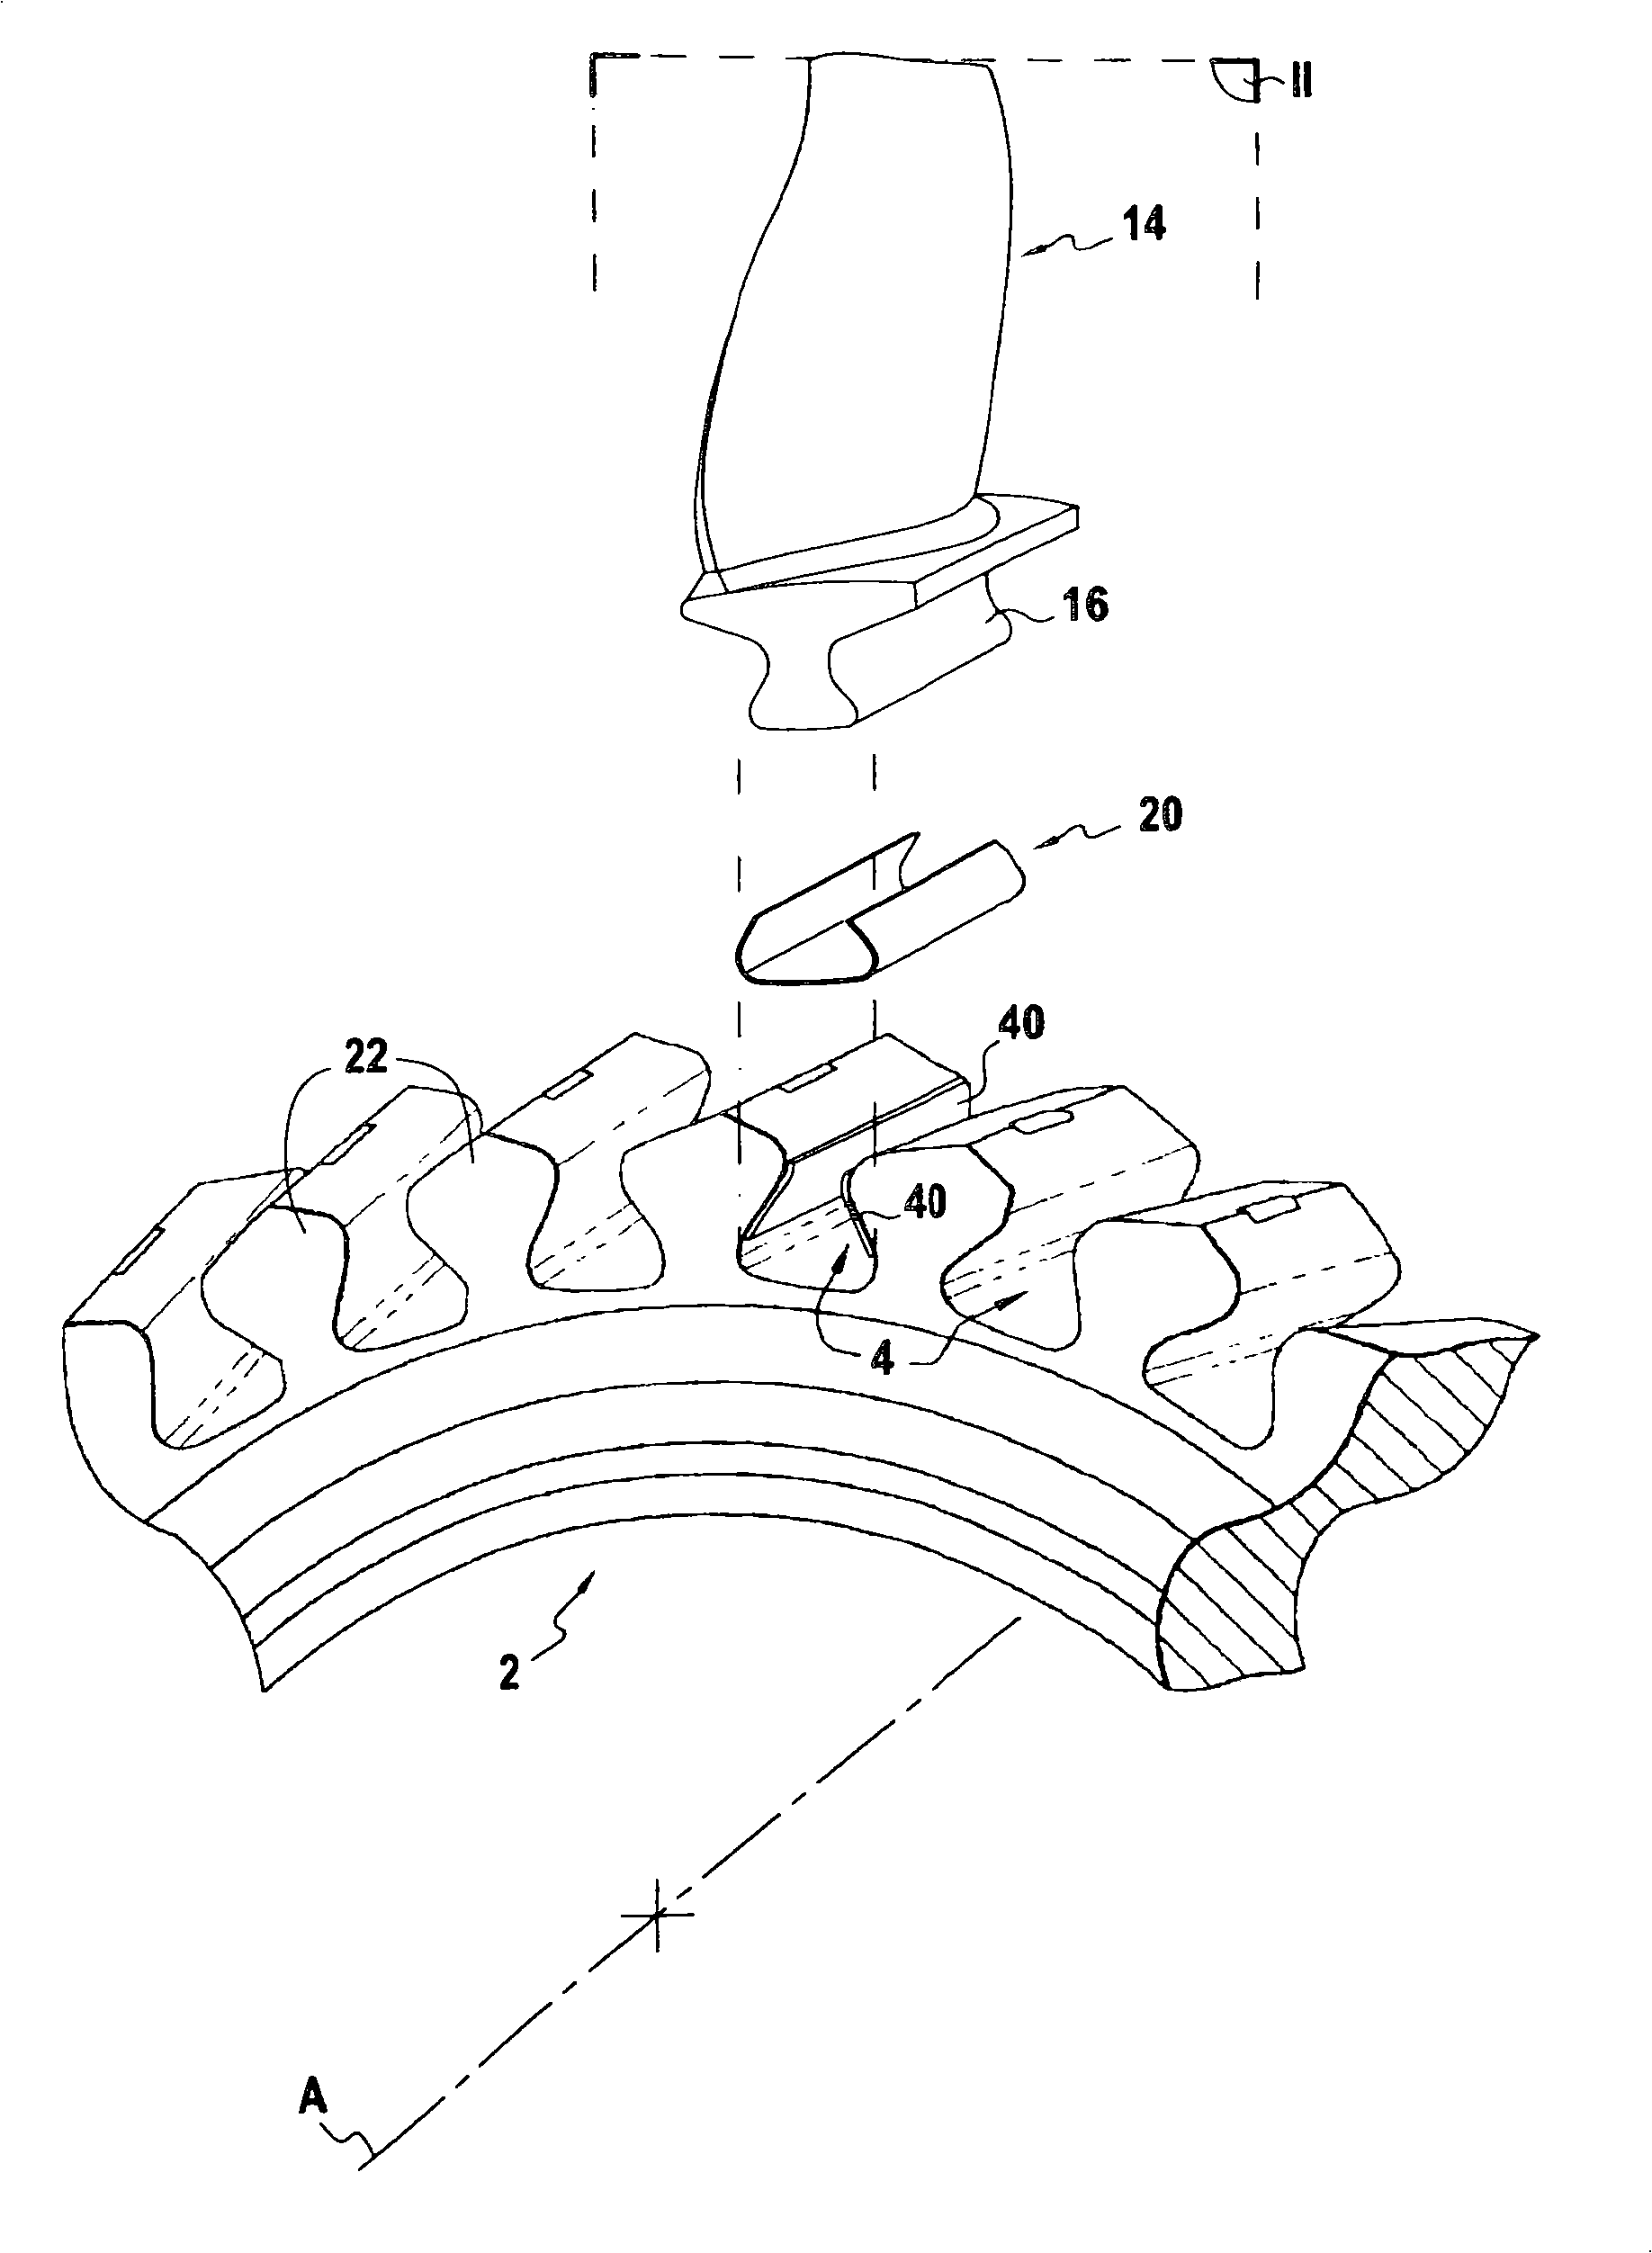 Turbomachine rotor assembly